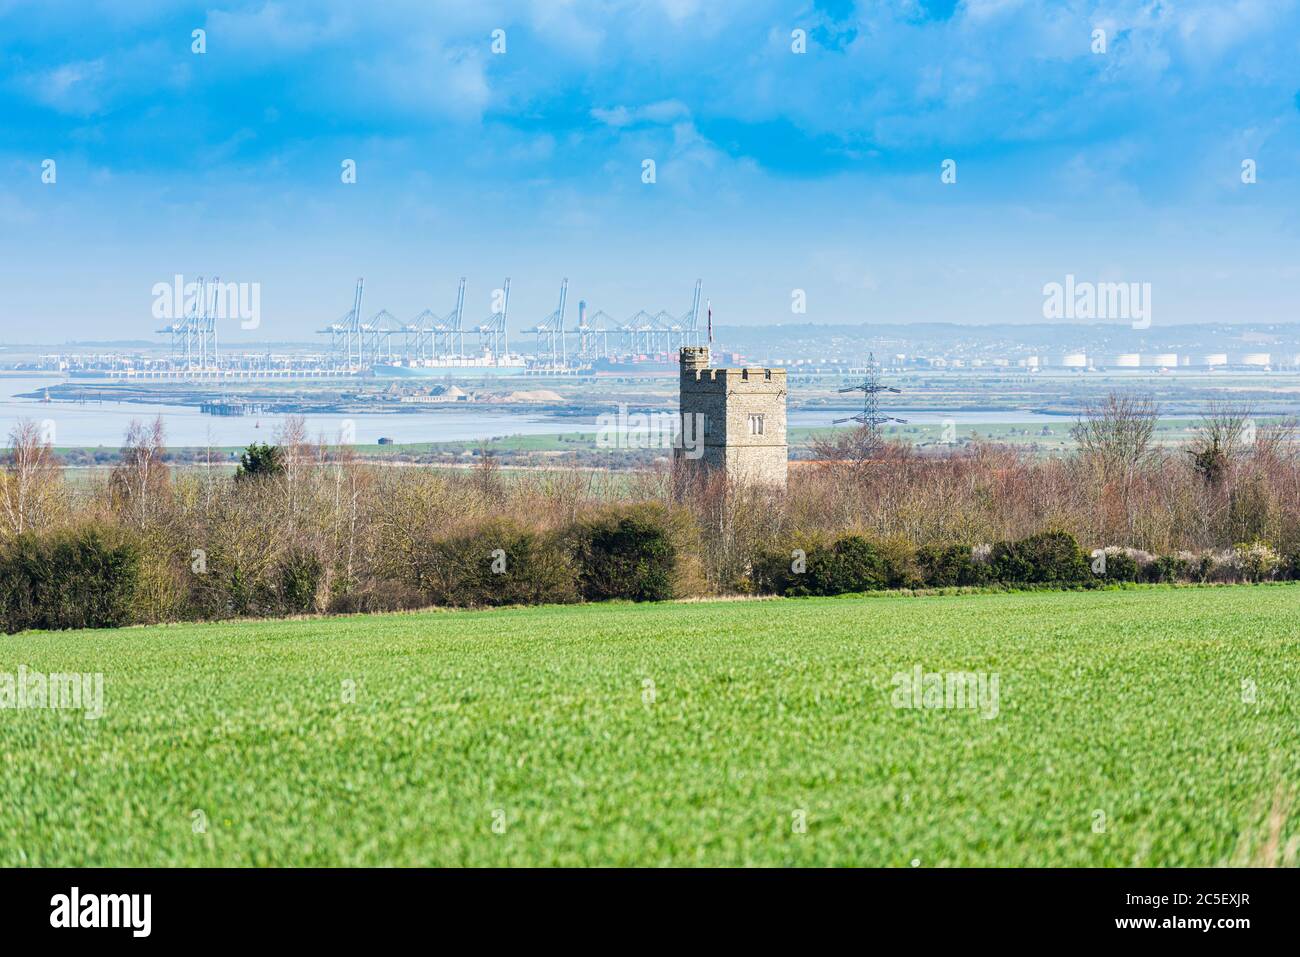 St Mary's Church in Chalk near Gravesend in Kent, England. Thames estuary and Essex can be seen in the distance Stock Photo